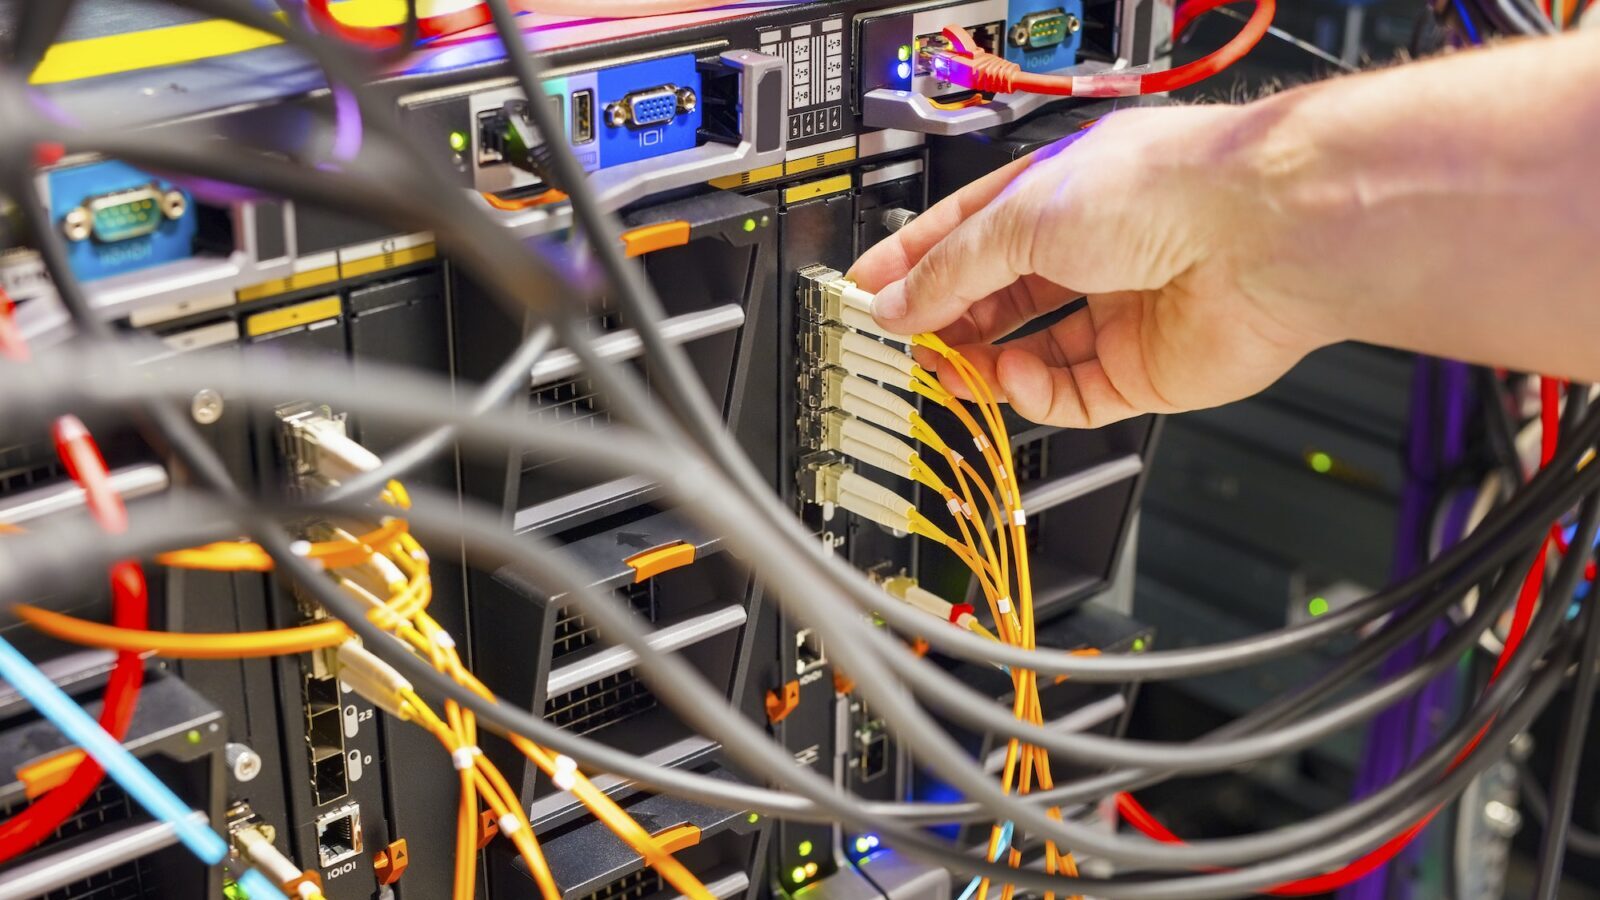 Hand Plugging Fiber Cable Into Switch In Datacenter